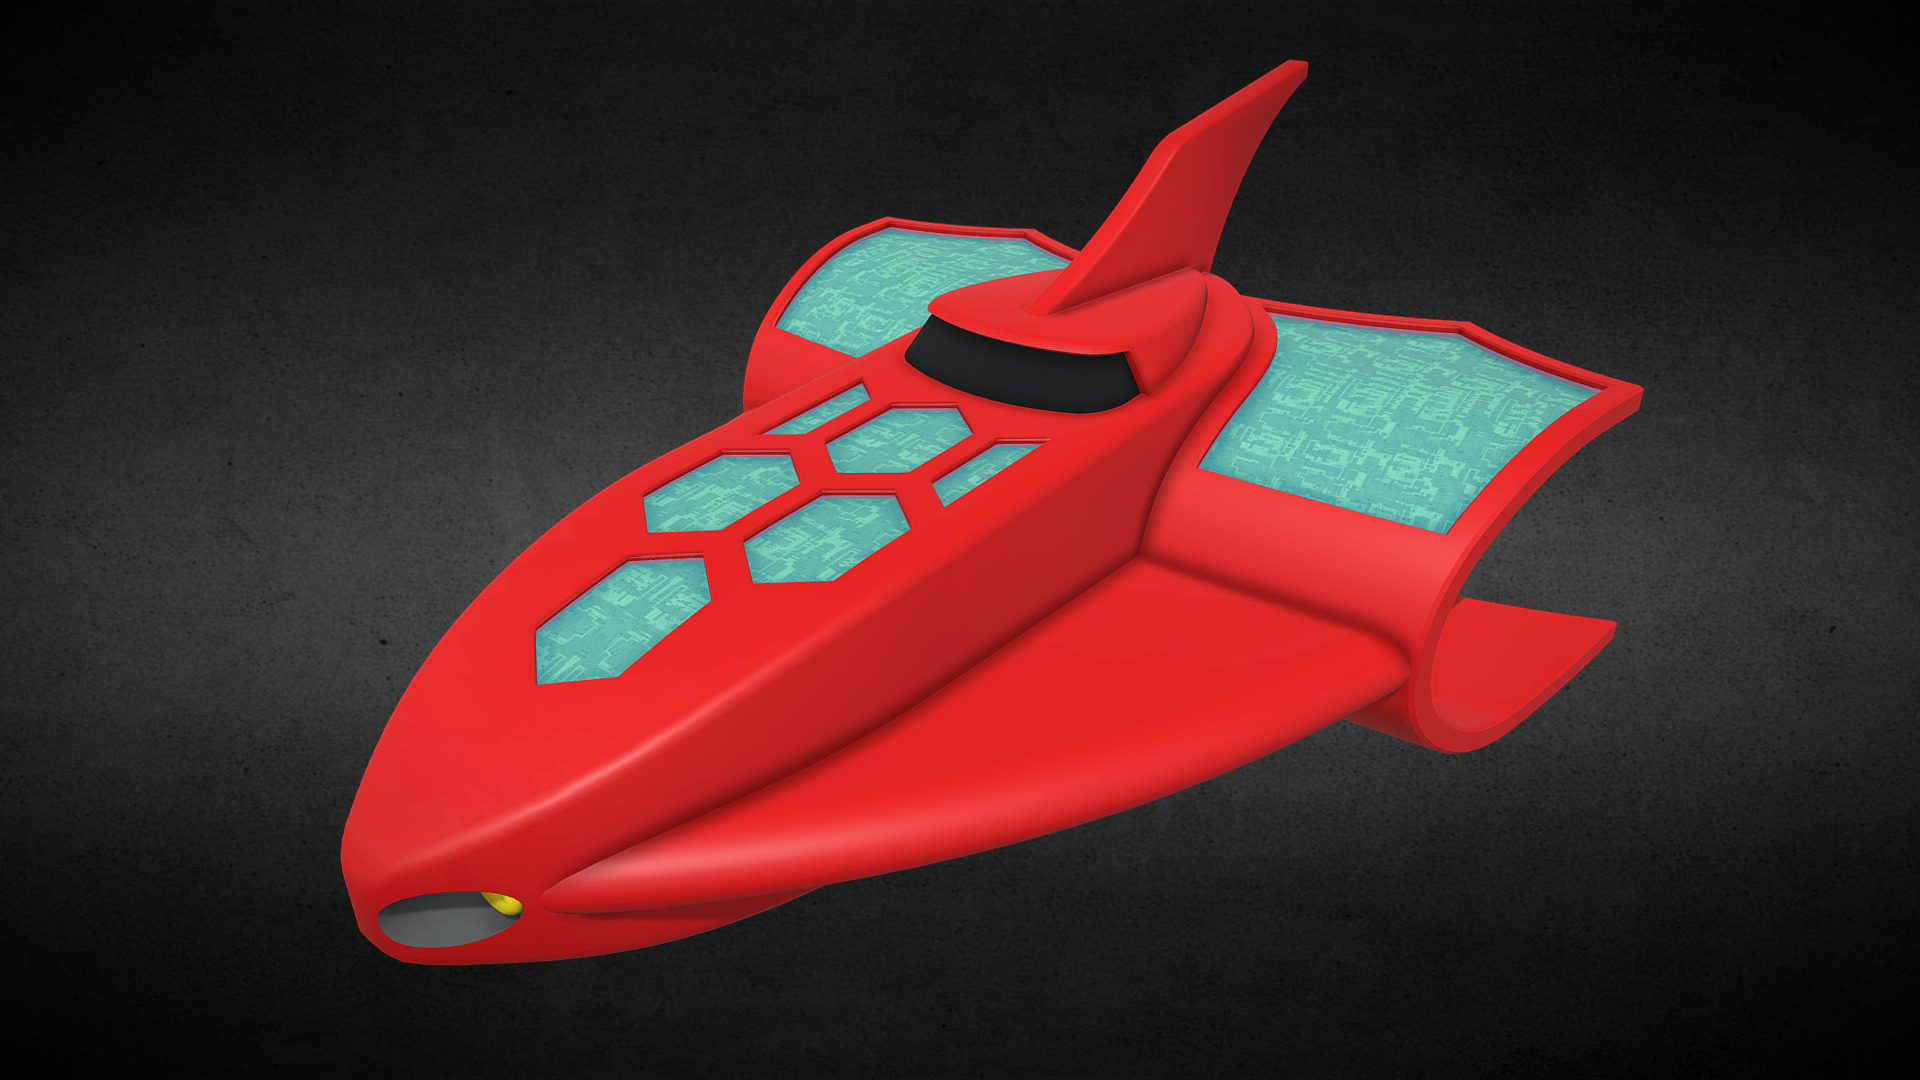 3D model Getter Eagle - This is a 3D model of the Getter Eagle. The 3D model is about a red plastic toy.